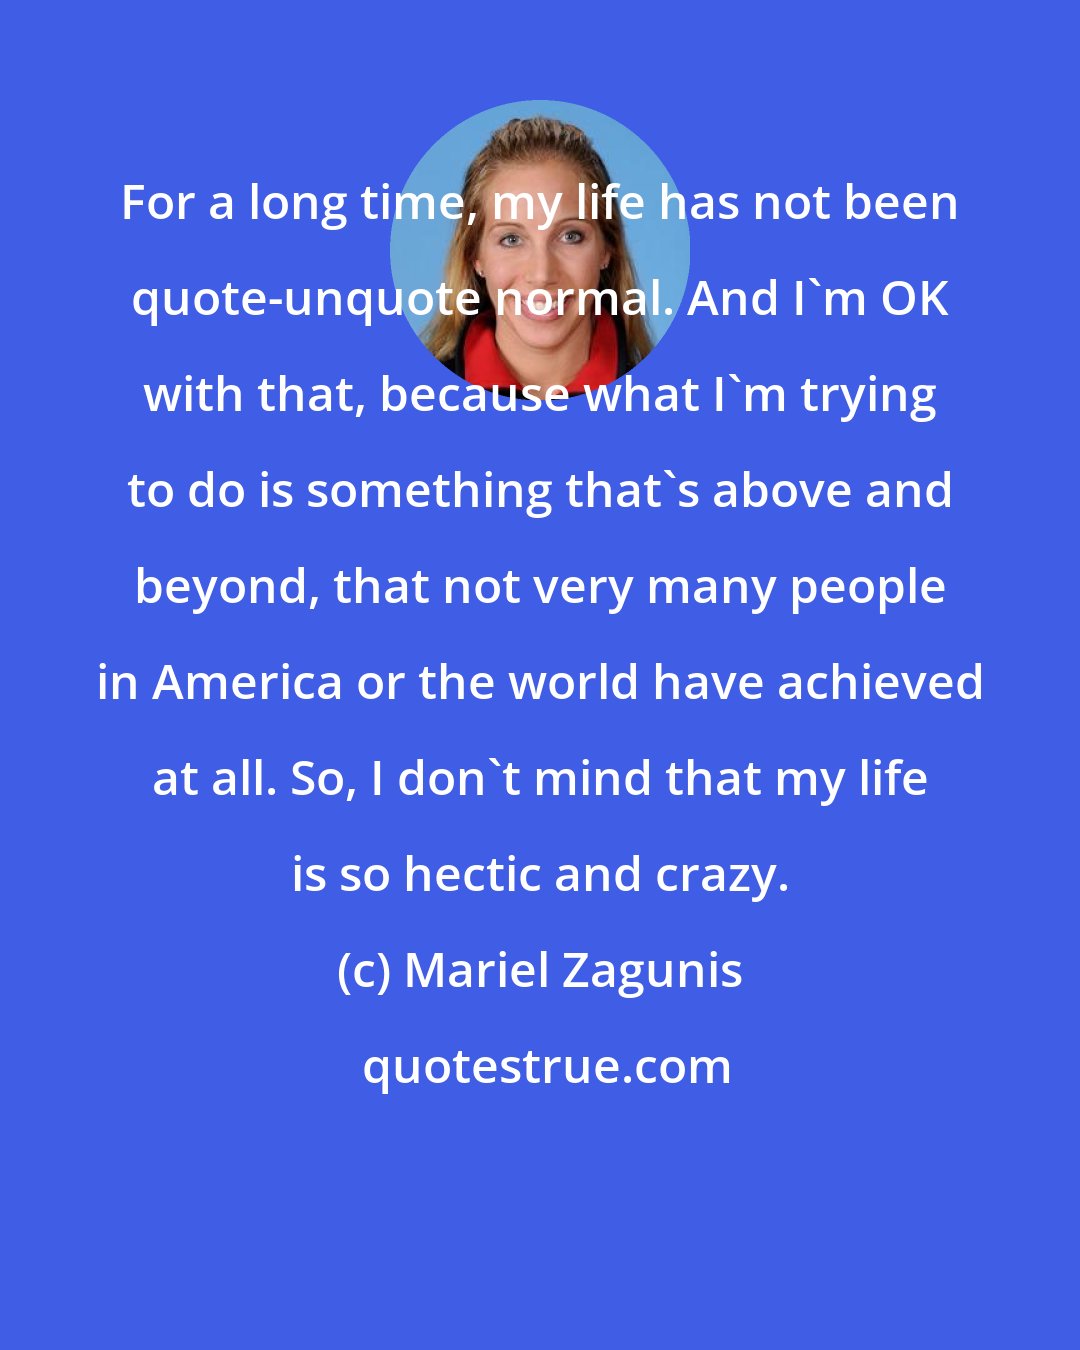 Mariel Zagunis: For a long time, my life has not been quote-unquote normal. And I'm OK with that, because what I'm trying to do is something that's above and beyond, that not very many people in America or the world have achieved at all. So, I don't mind that my life is so hectic and crazy.